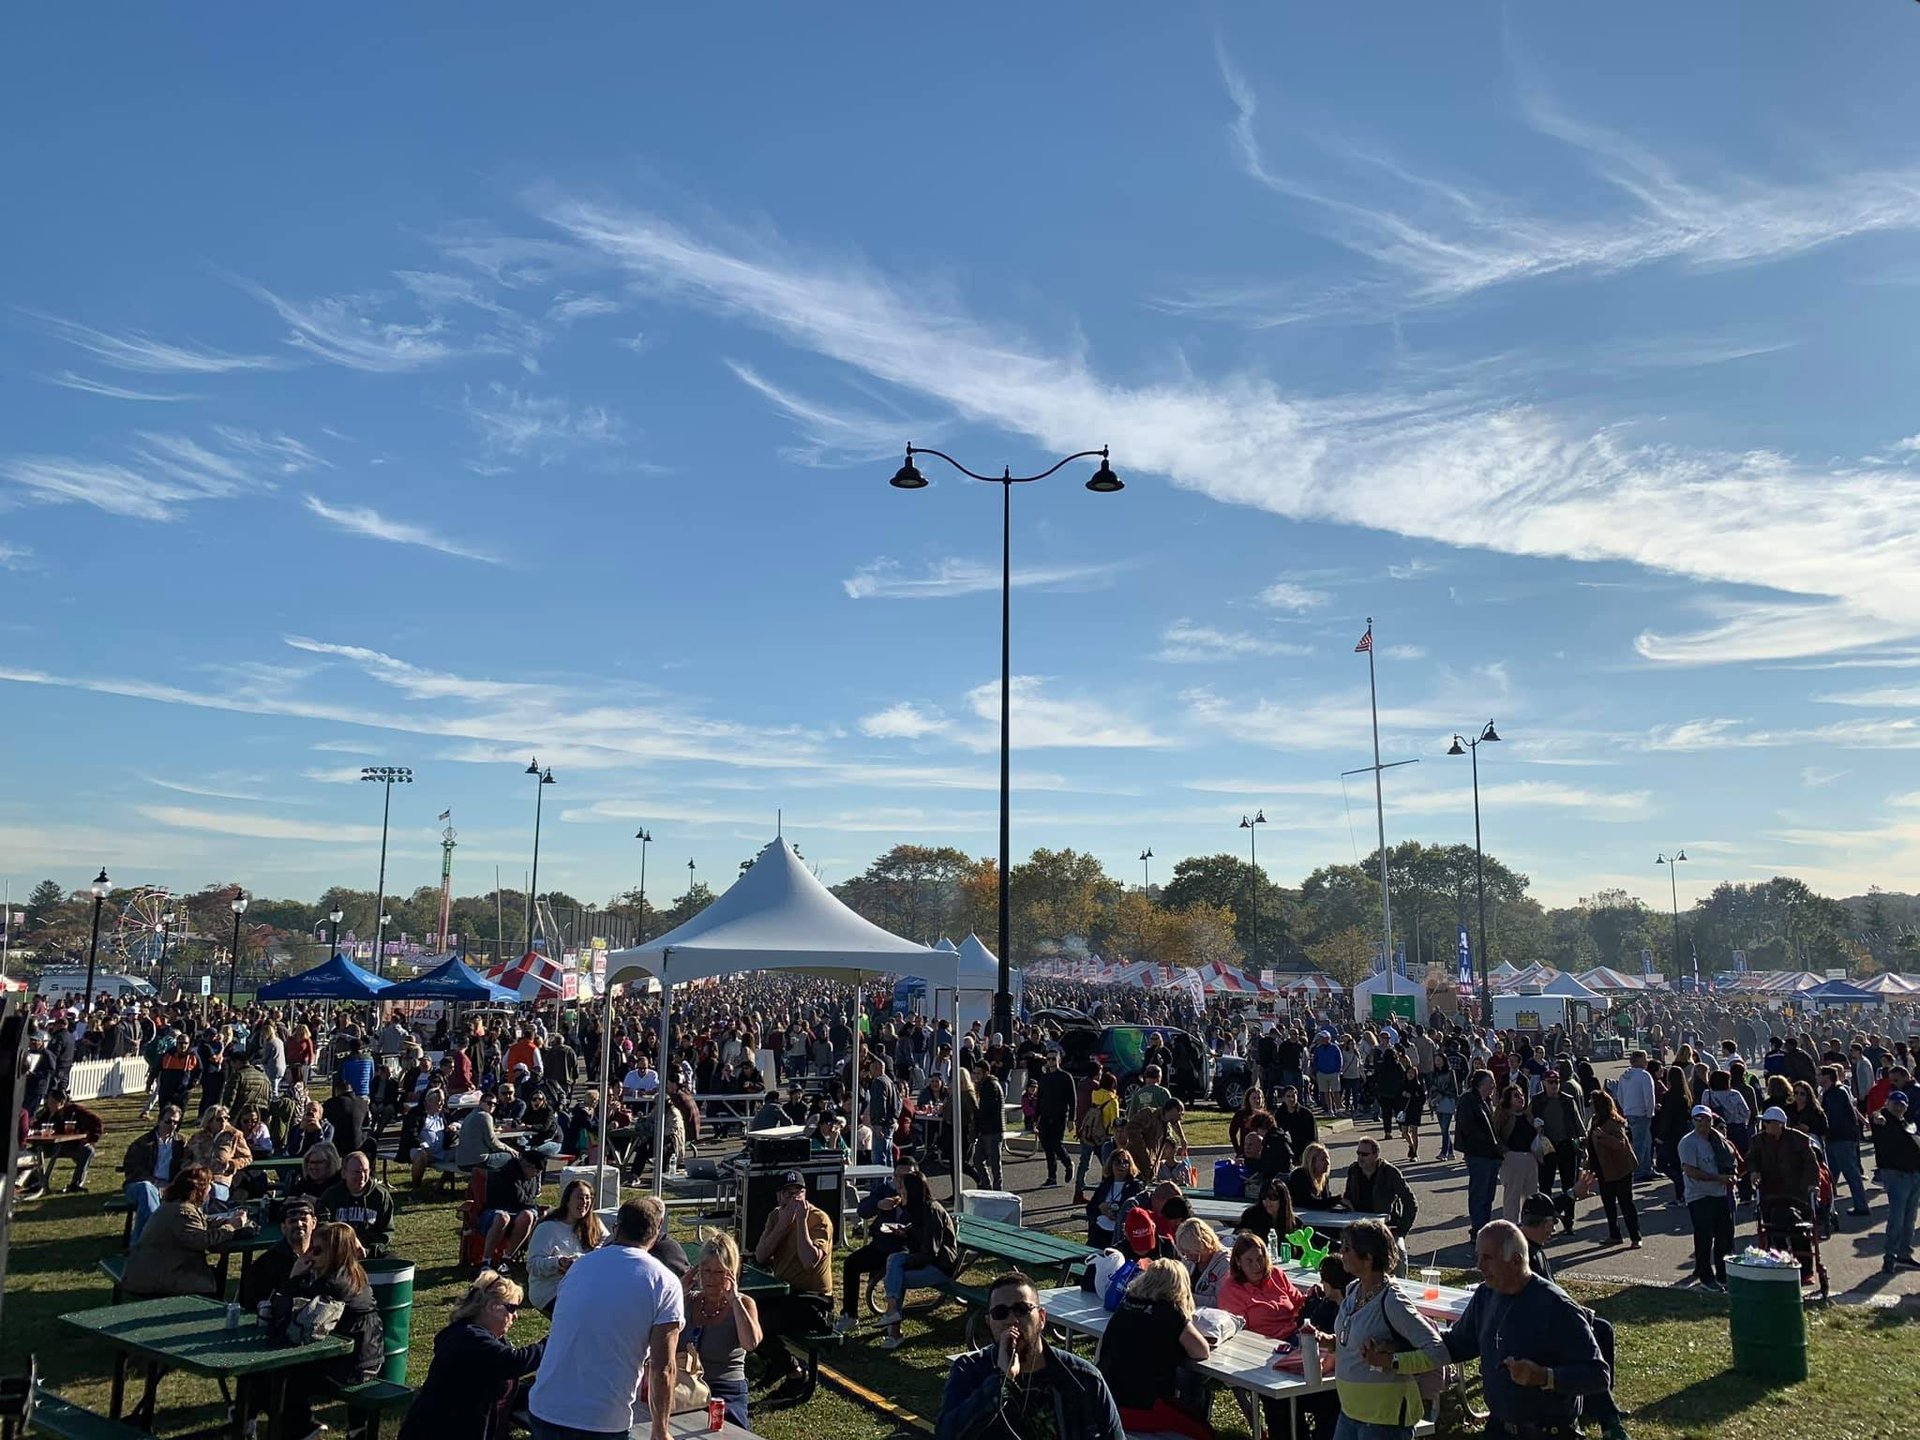 The Oyster Festival Festival in Oyster Bay, NY